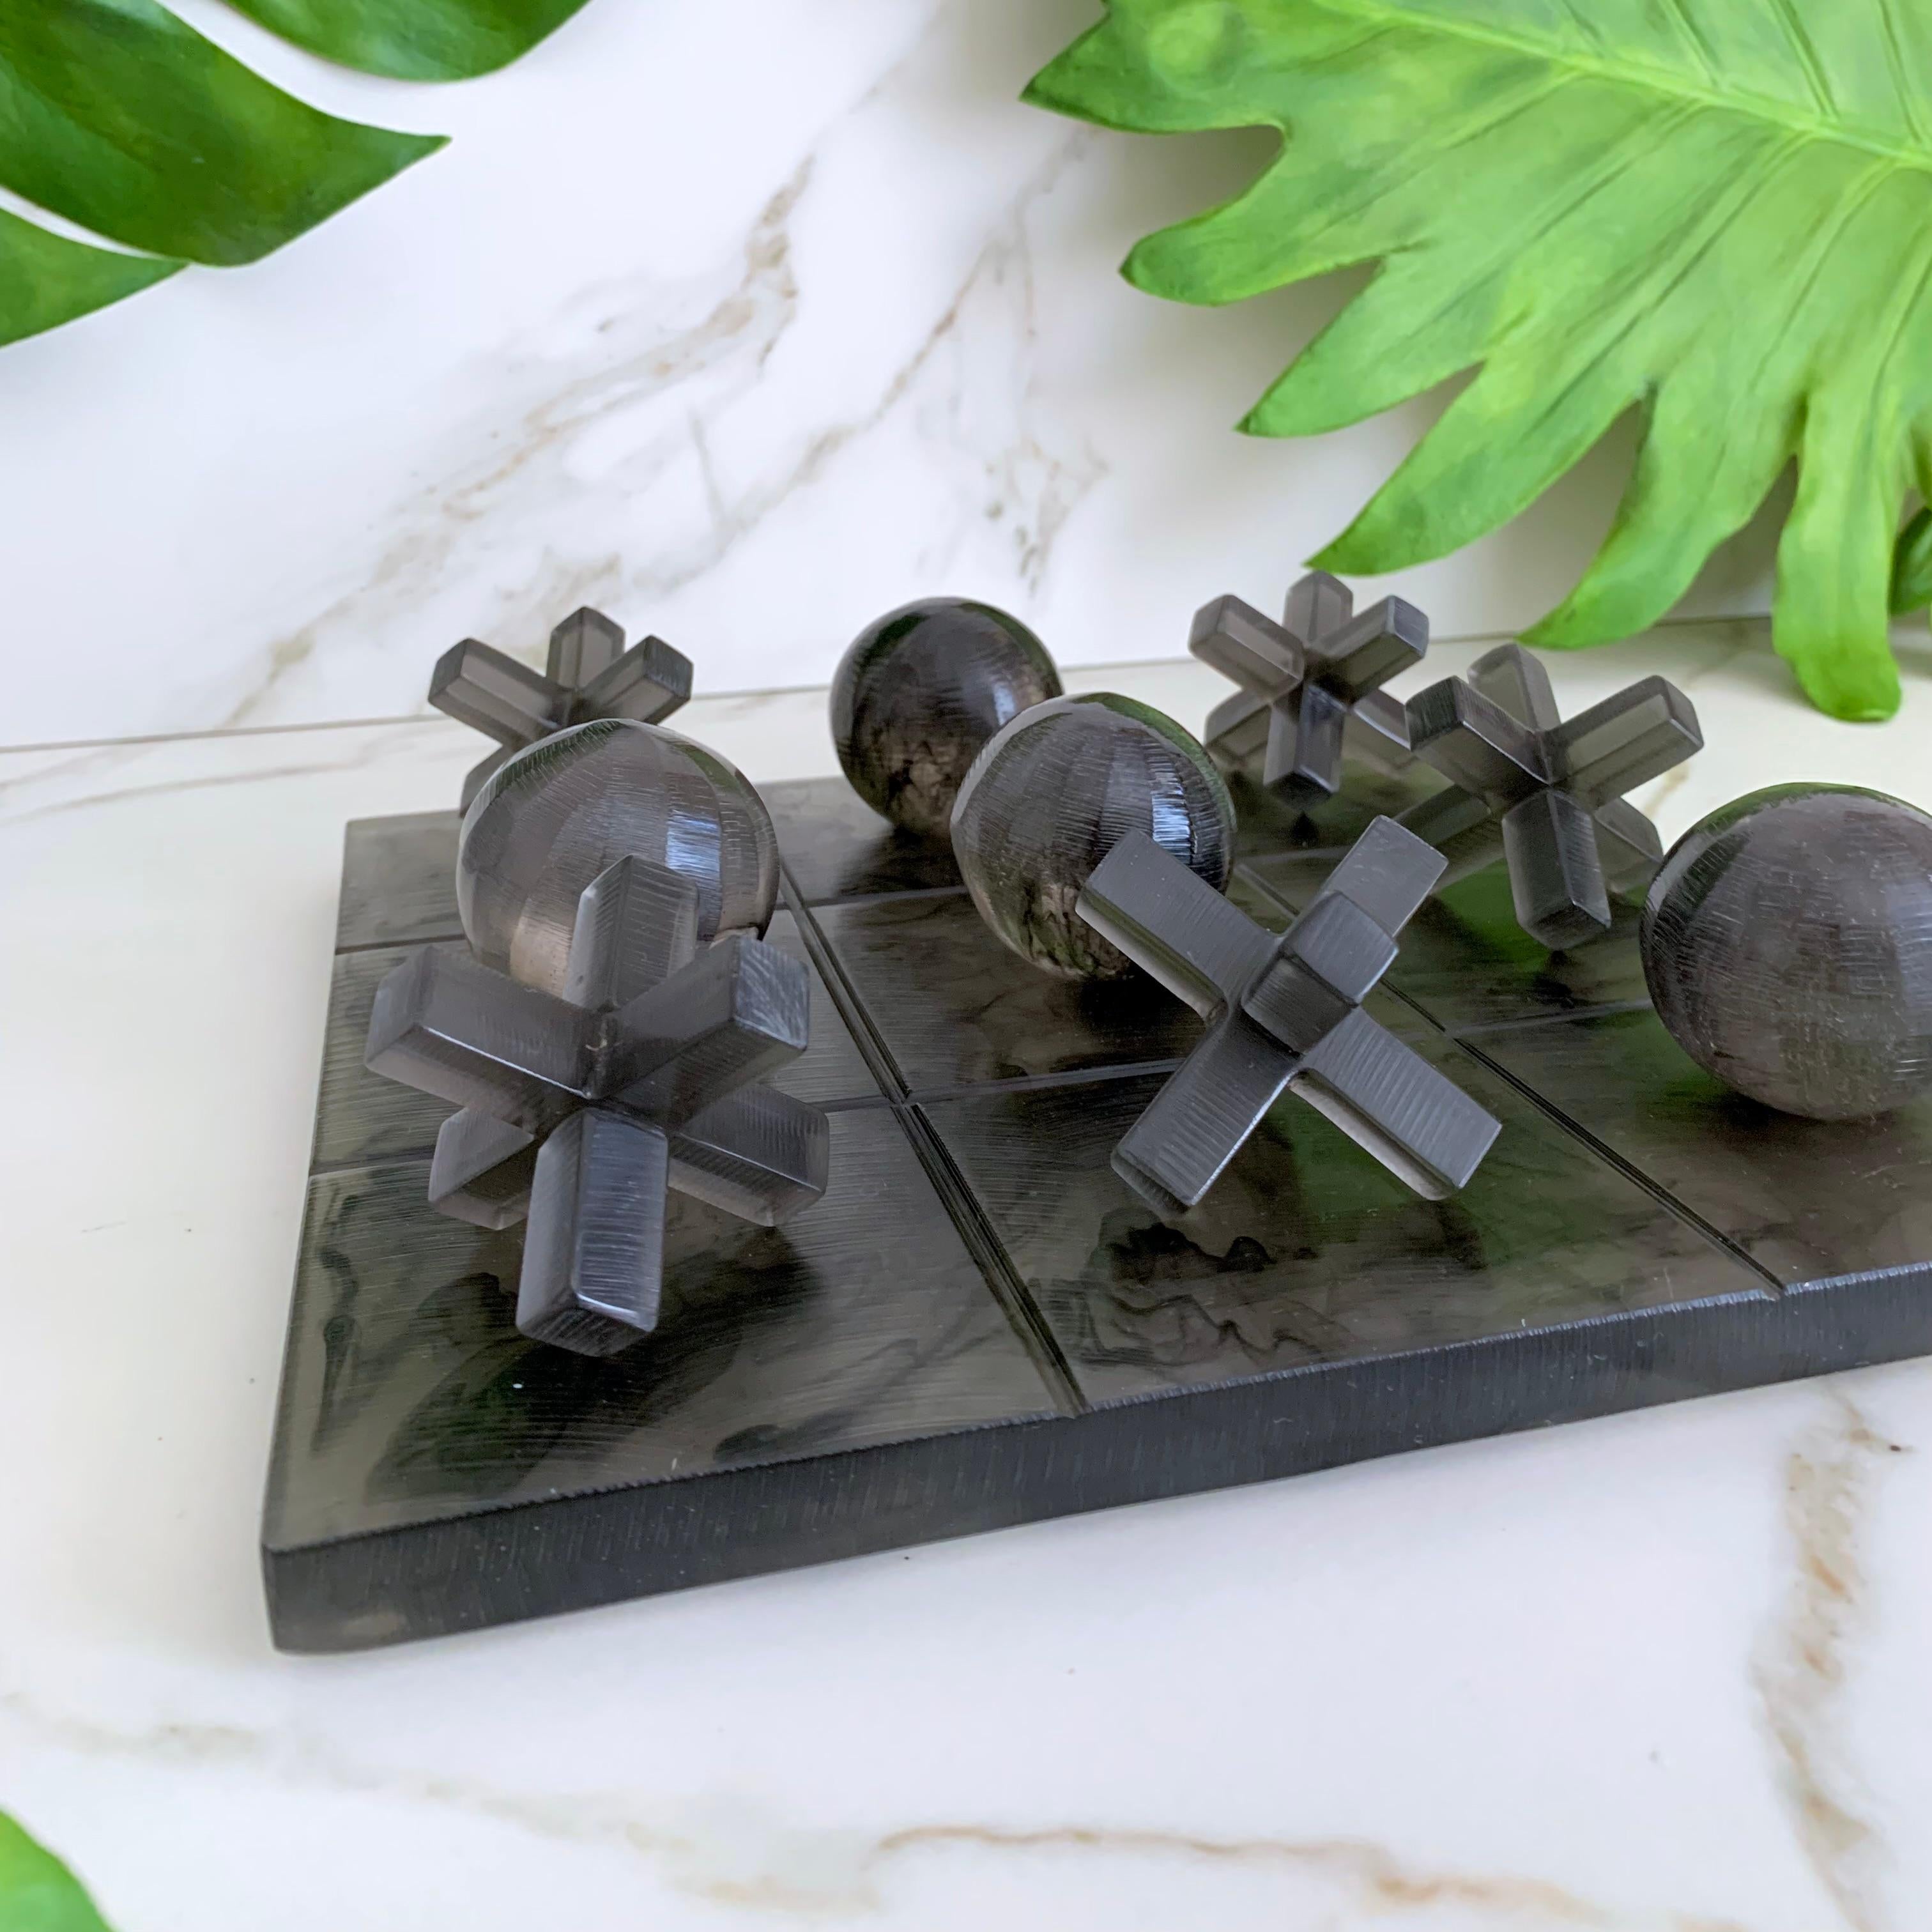 Our Tic Tac Toe is a beautiful, modern and fun take on the classic game. The three dimensional pieces and board are handmade in smoke resin with black marbled texture. It will be the coolest statement piece on any coffee table.

Materials: Resin